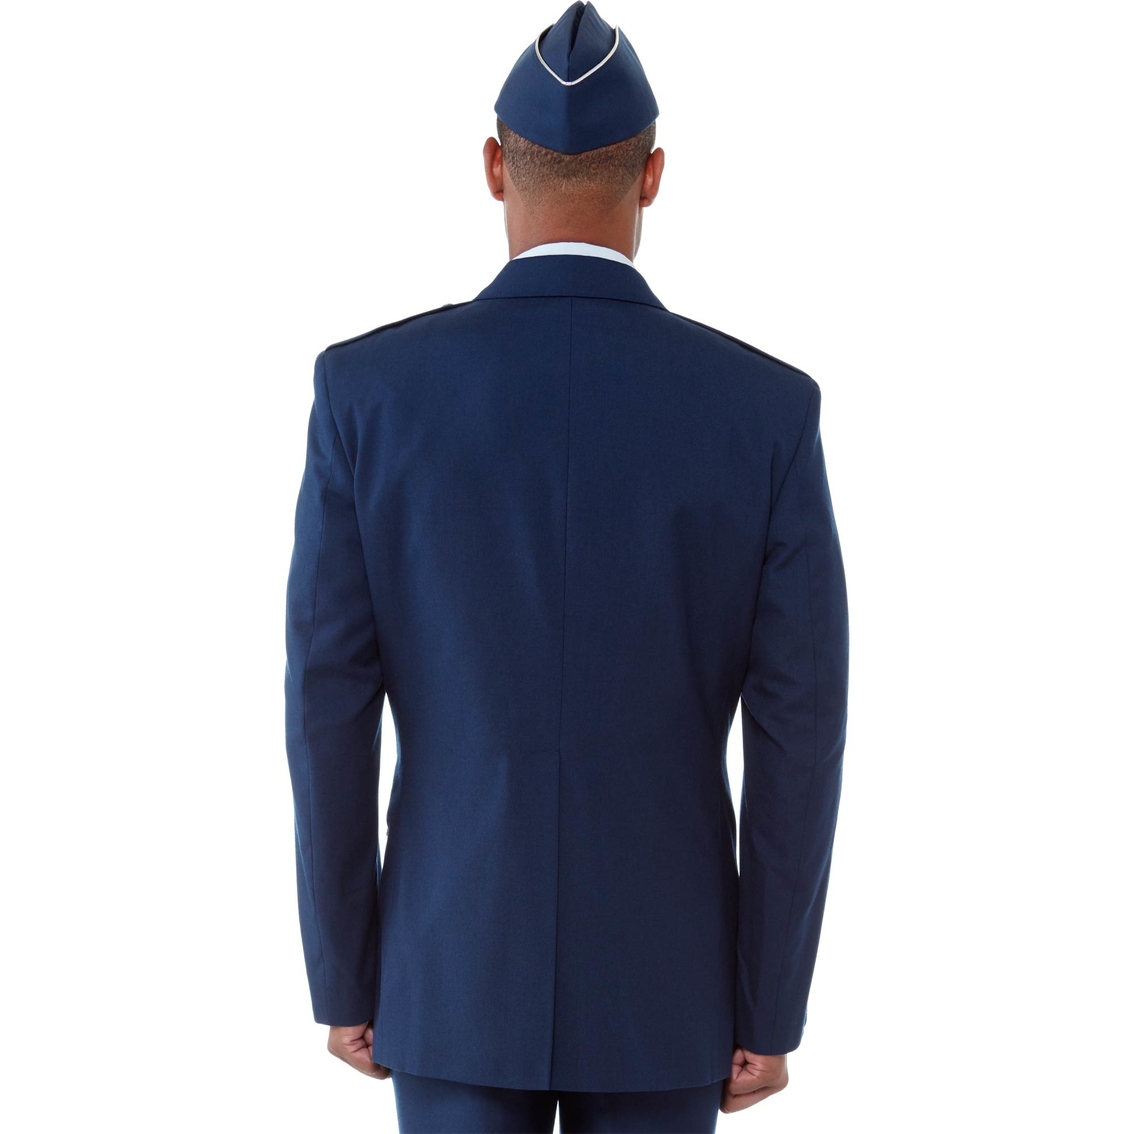 Air Force Officer Service Dress Coat - Image 2 of 4